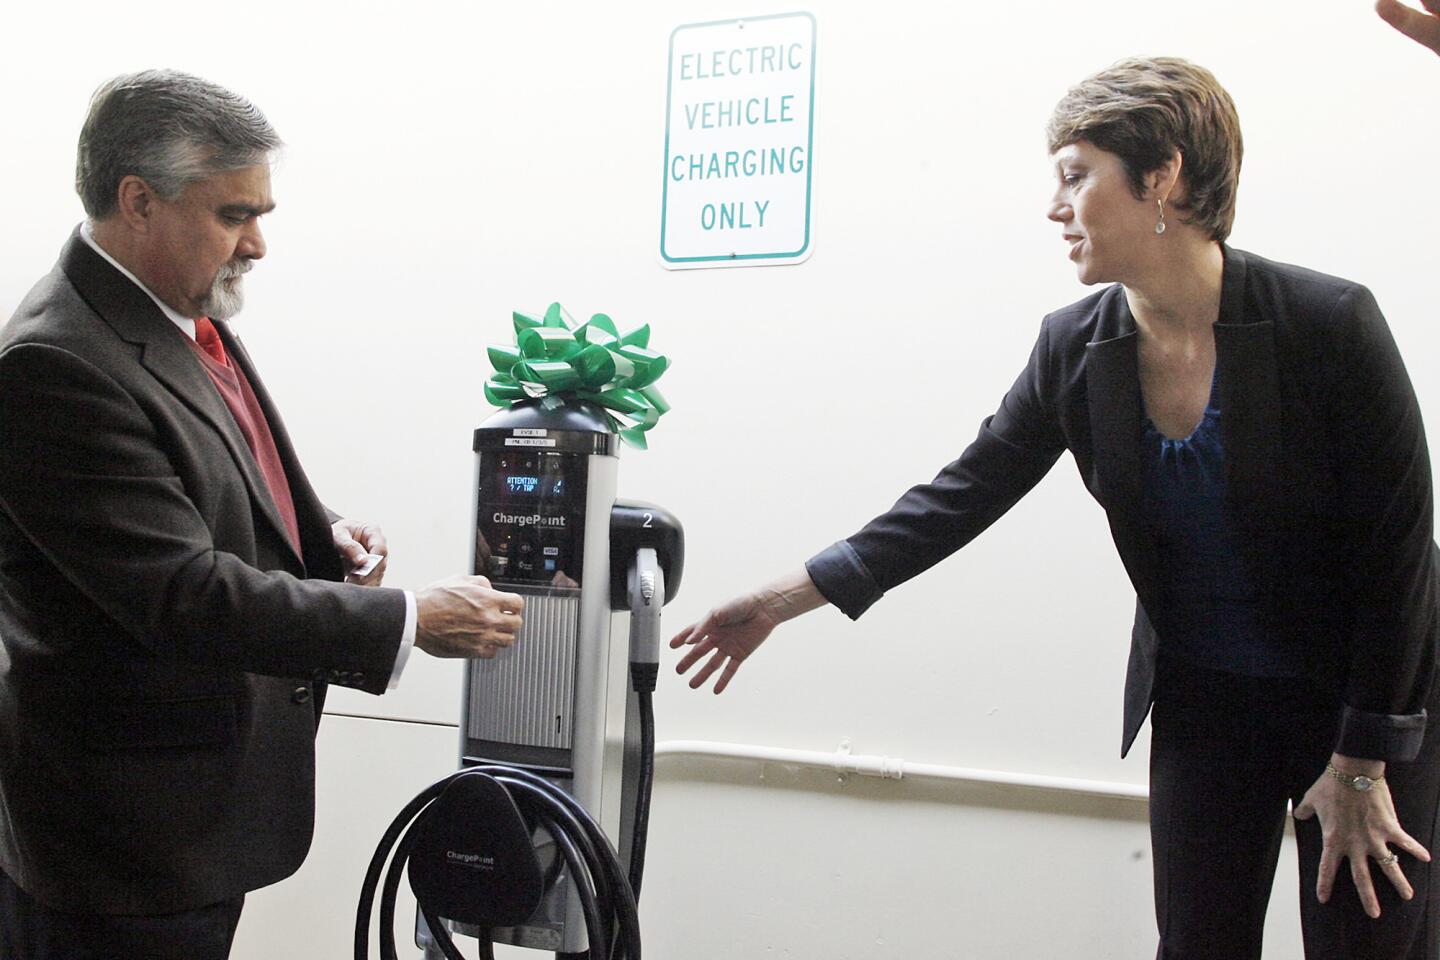 Burbank receives electric charging vehicle stations throughout the city